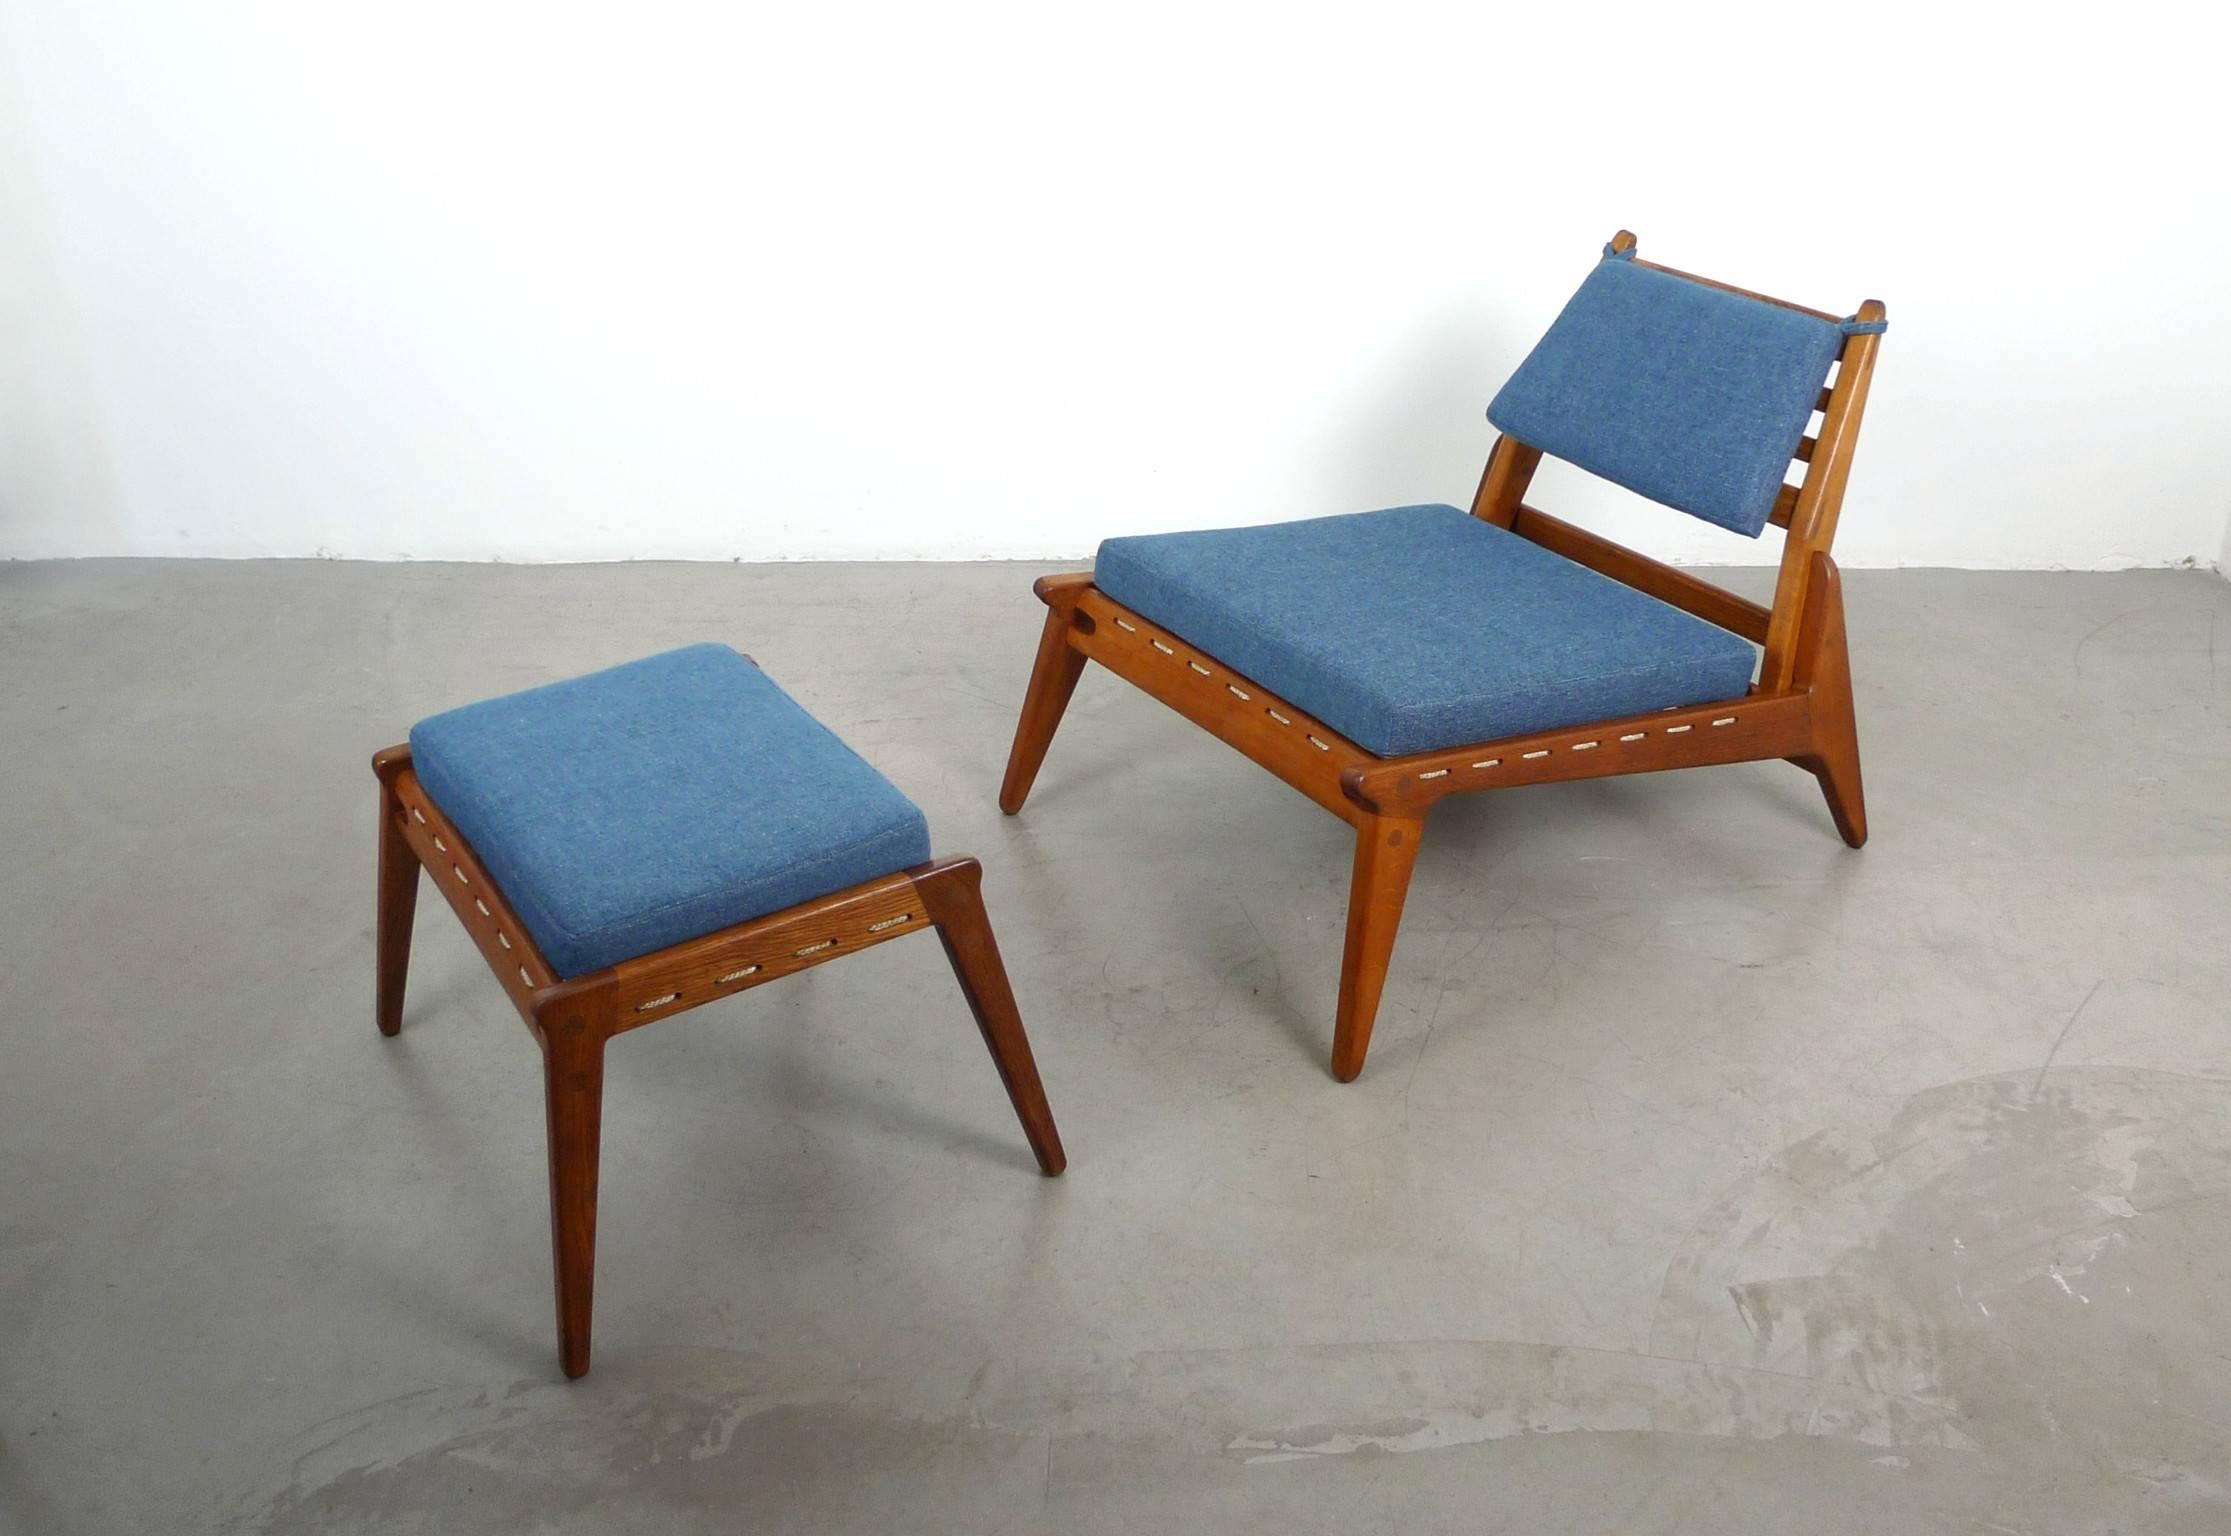 Low 1950s lounge chair set with matching ottoman from Germany.
The dynamic form of the frame is made of solid oak and features a cord lining for the seat cushions. The edges are connected by decorative wood tenons. The upholstery and fabric of the